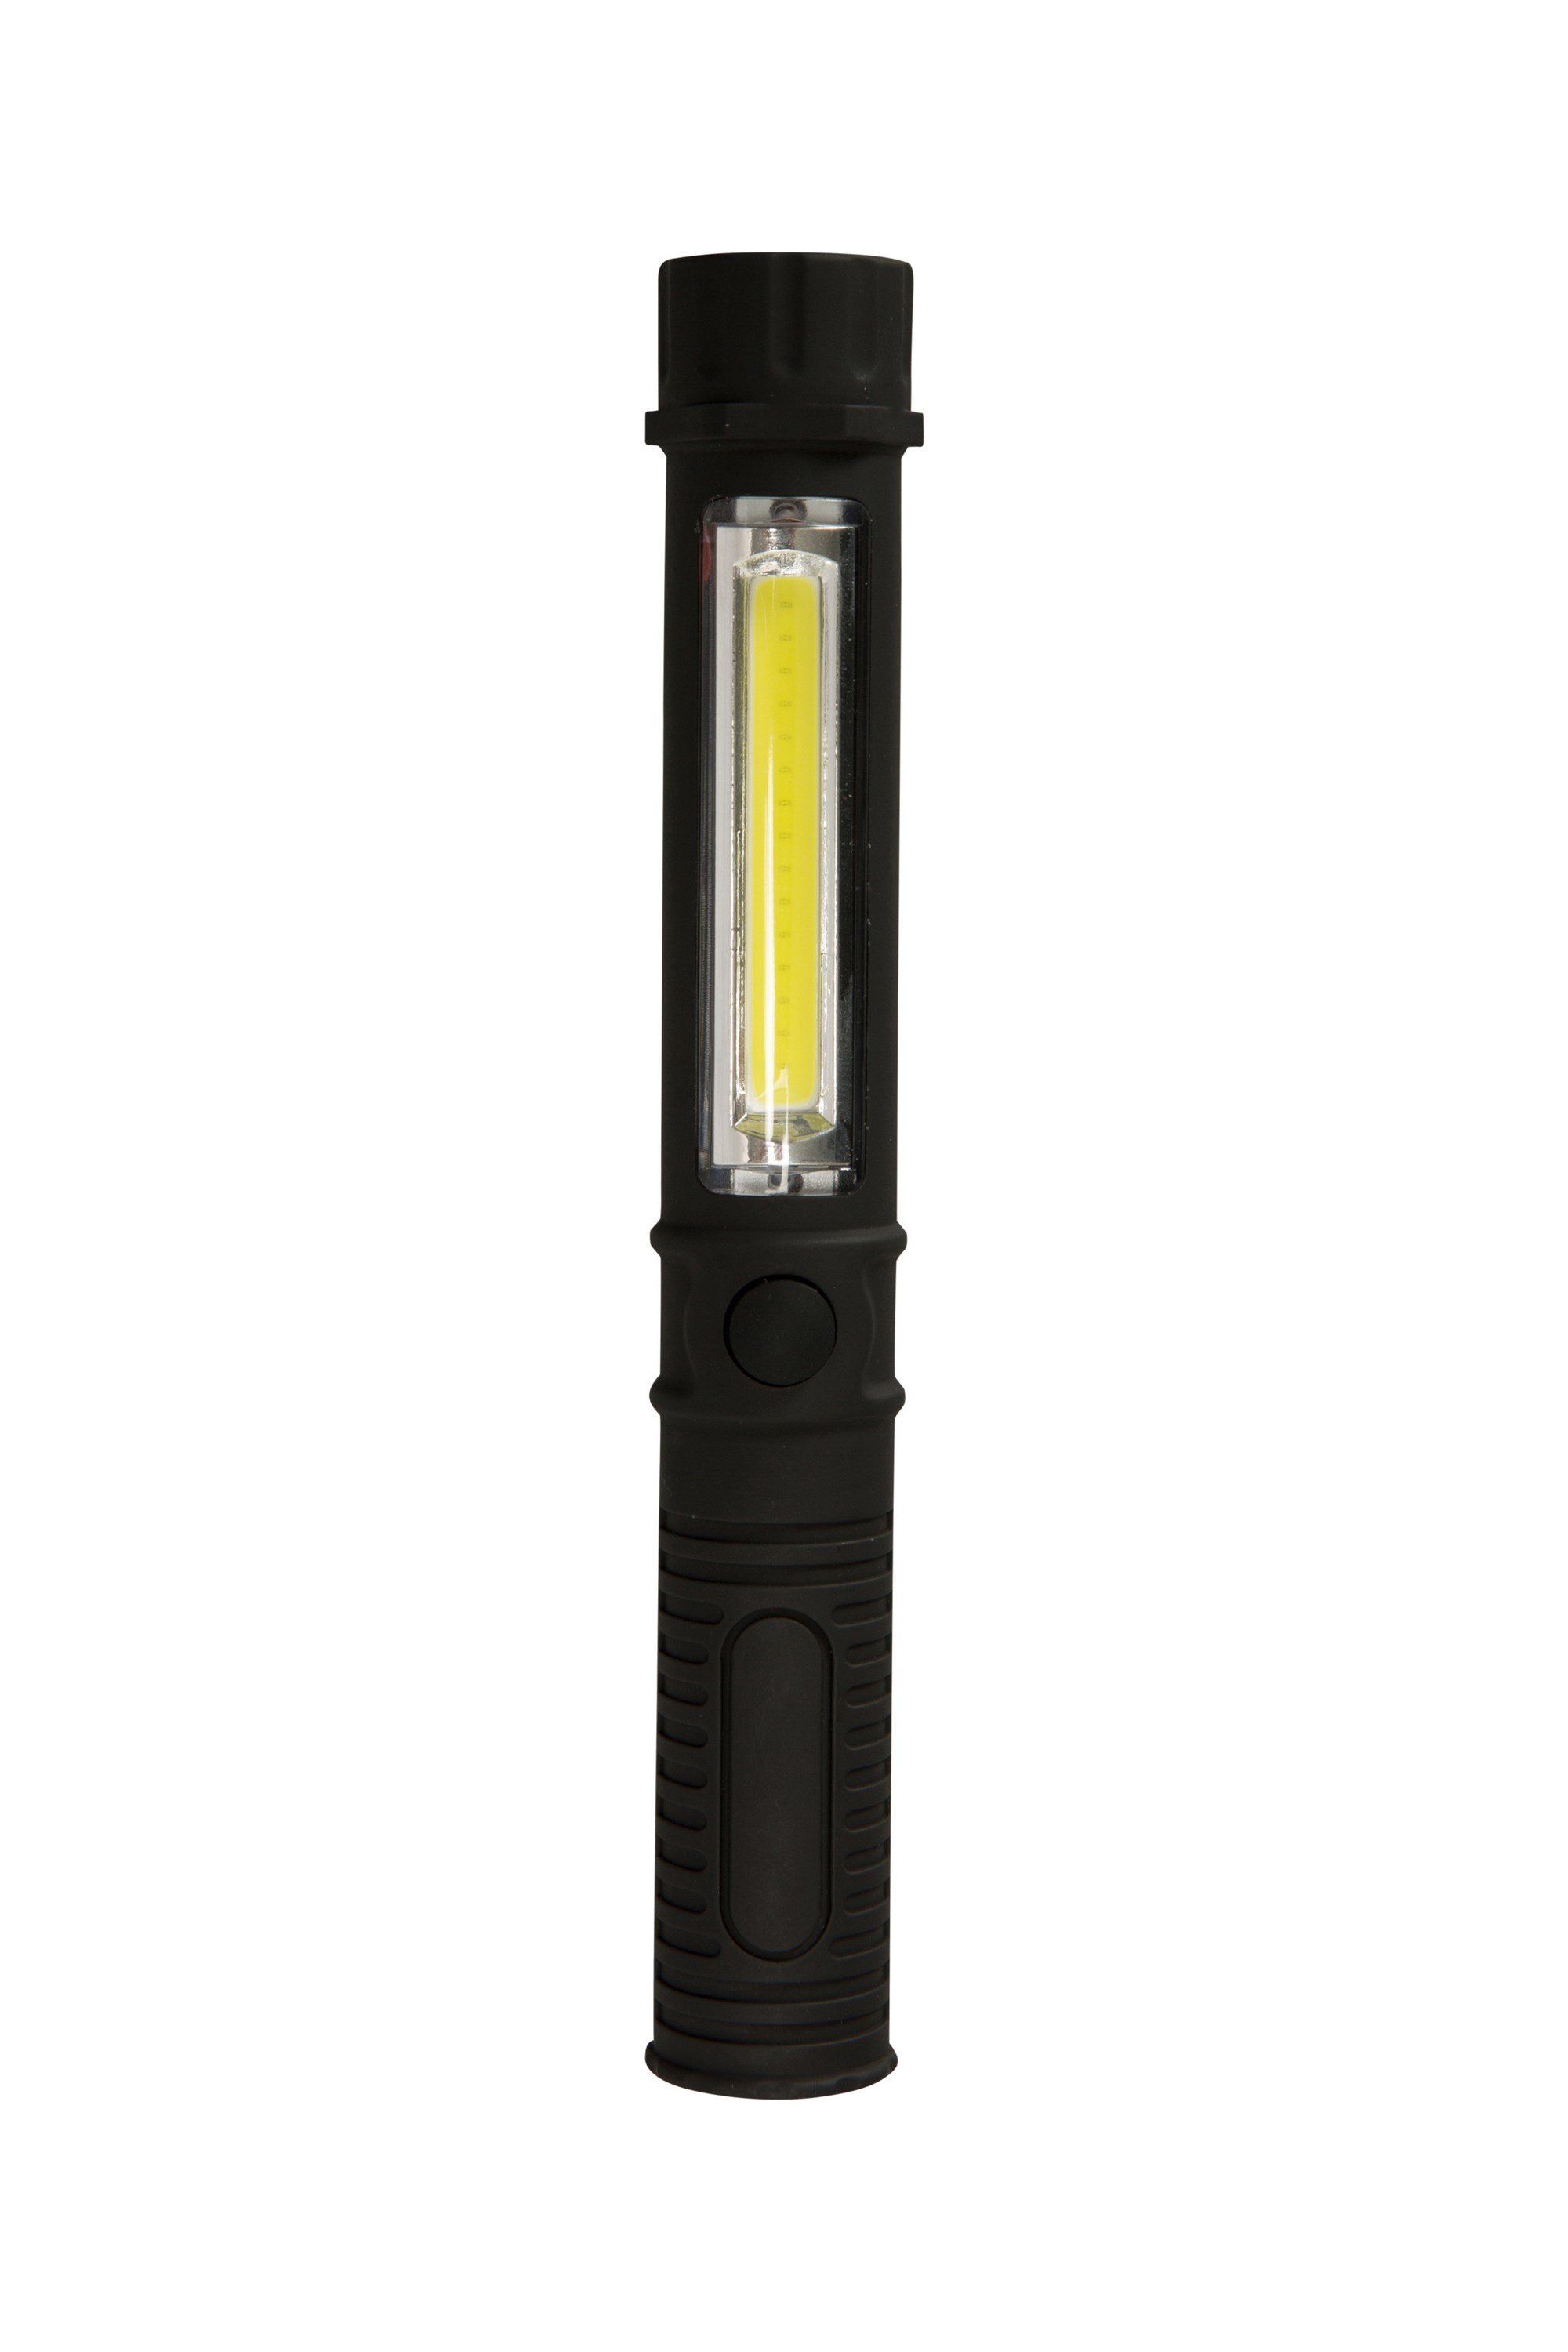 For Festivals Battery Lasts for upto 25 Hours Mountain Warehouse Torch Glow Stick 2 LED Light Stick for Flashing or Glow Light Party & the Dark Bright LED Torch